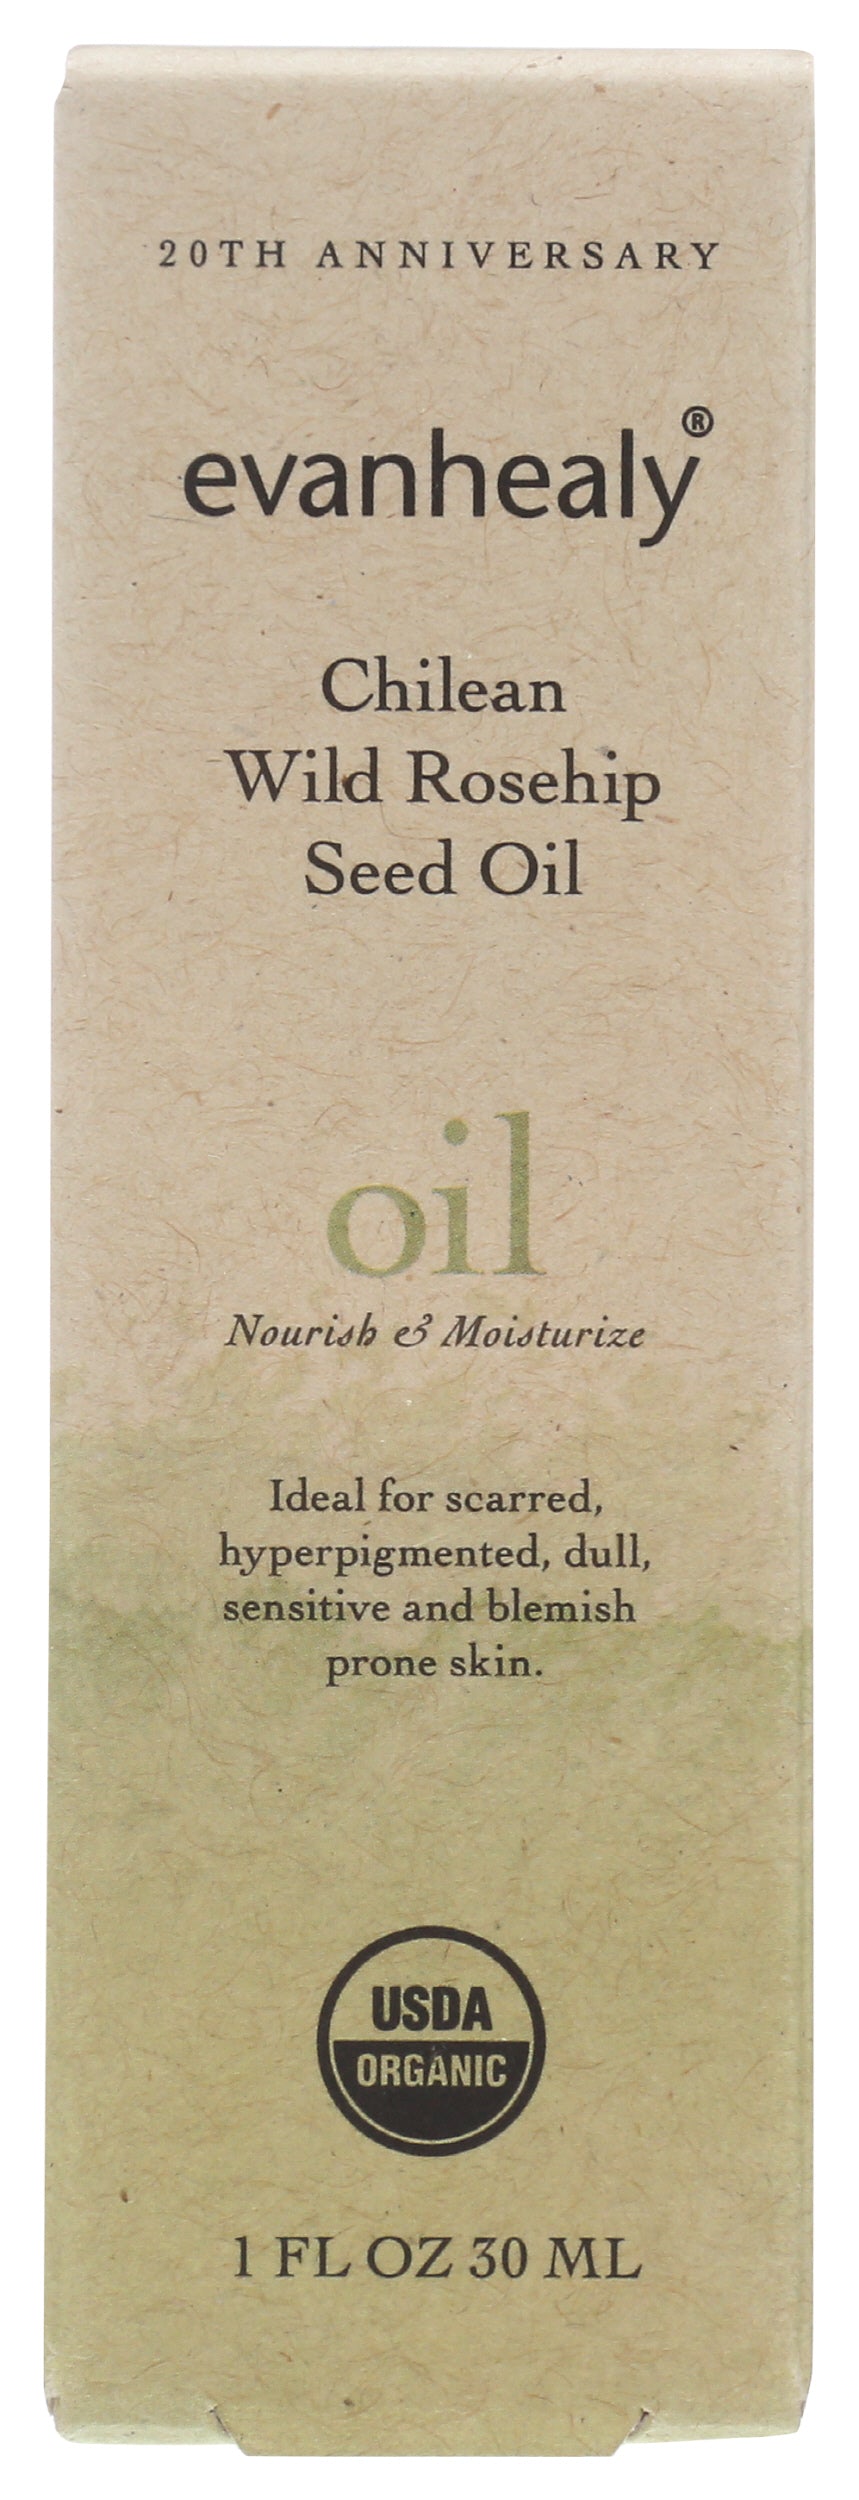 evanhealy Chilean Wild Rosehip Seed Oil 1 Fl. Oz. Front